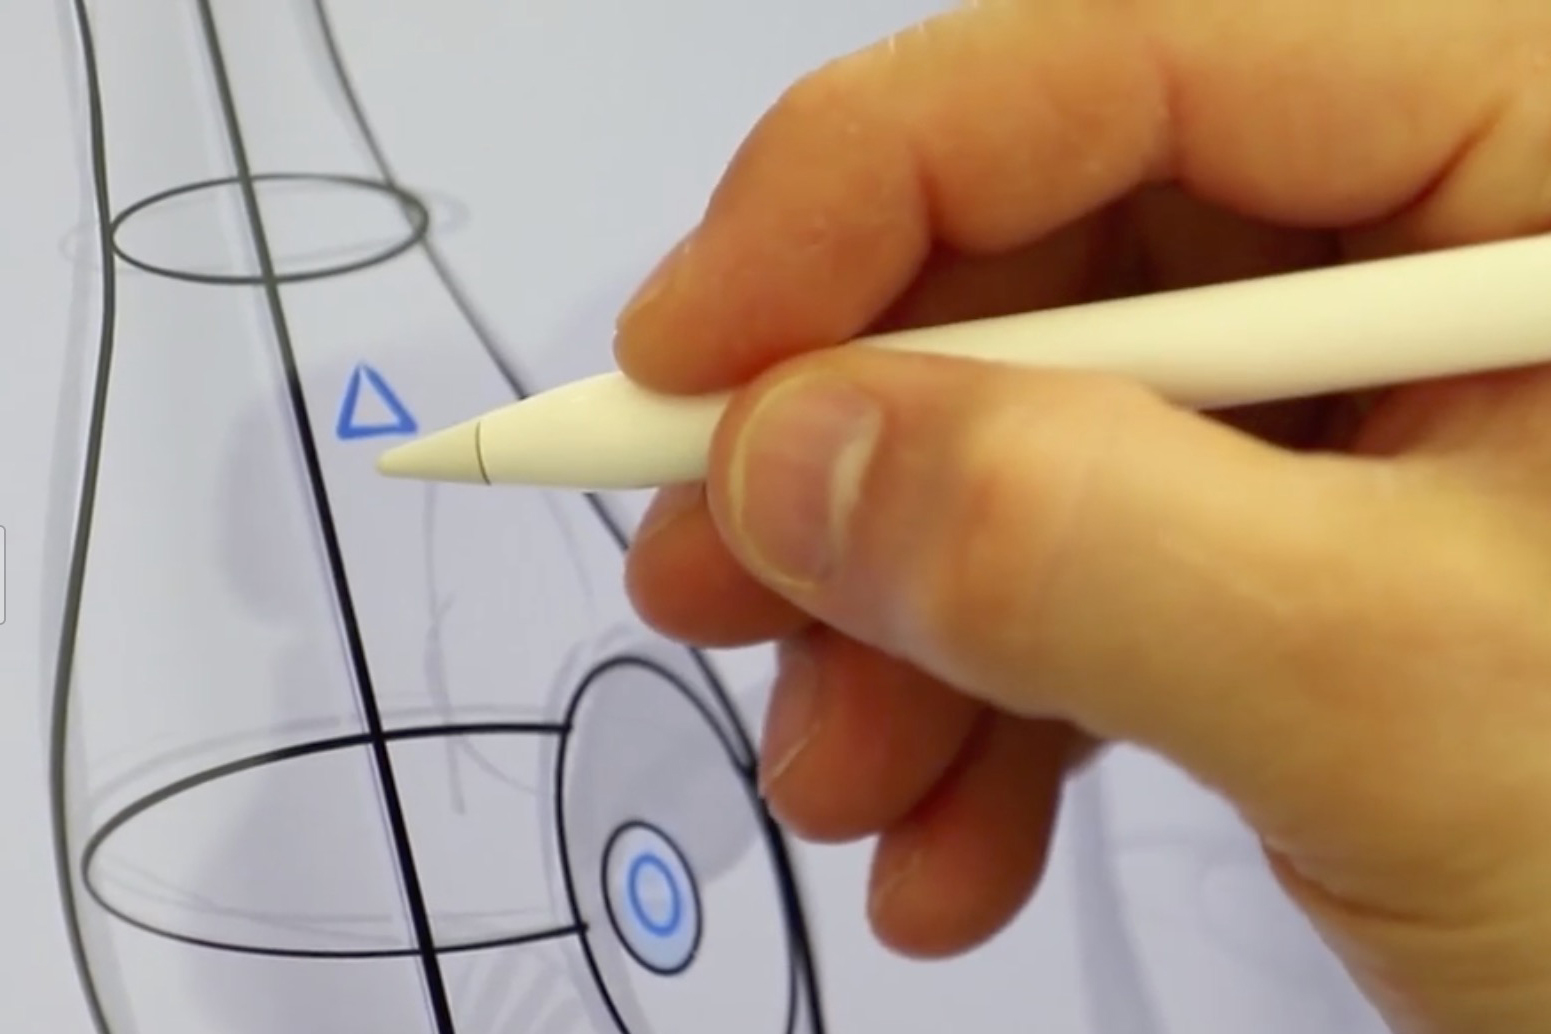 AutoDraw is a new kind of drawing tool that pairs the magic of